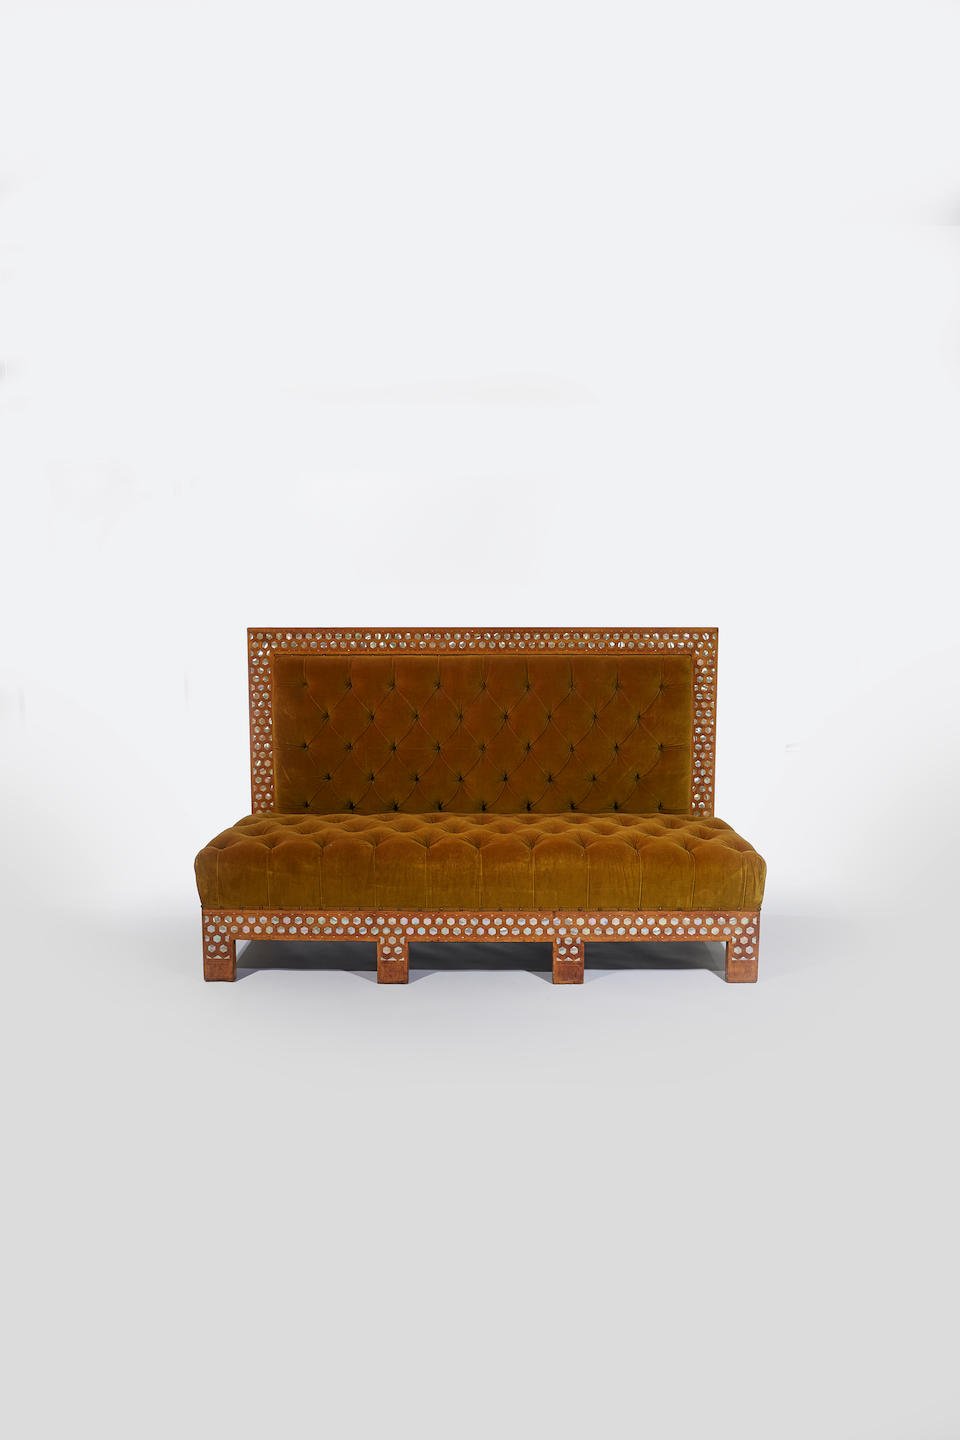 Louis C. Tiffany (1848- 1930) for Associated Artists Important Sofacirca 1879for the salon of Kemp House, New Yorkholly inlaid with mother of pearl, original tufted olive velvet upholsteryheight 43 1/4in (110cm); width 70in (178cm); depth 31in (79cm)